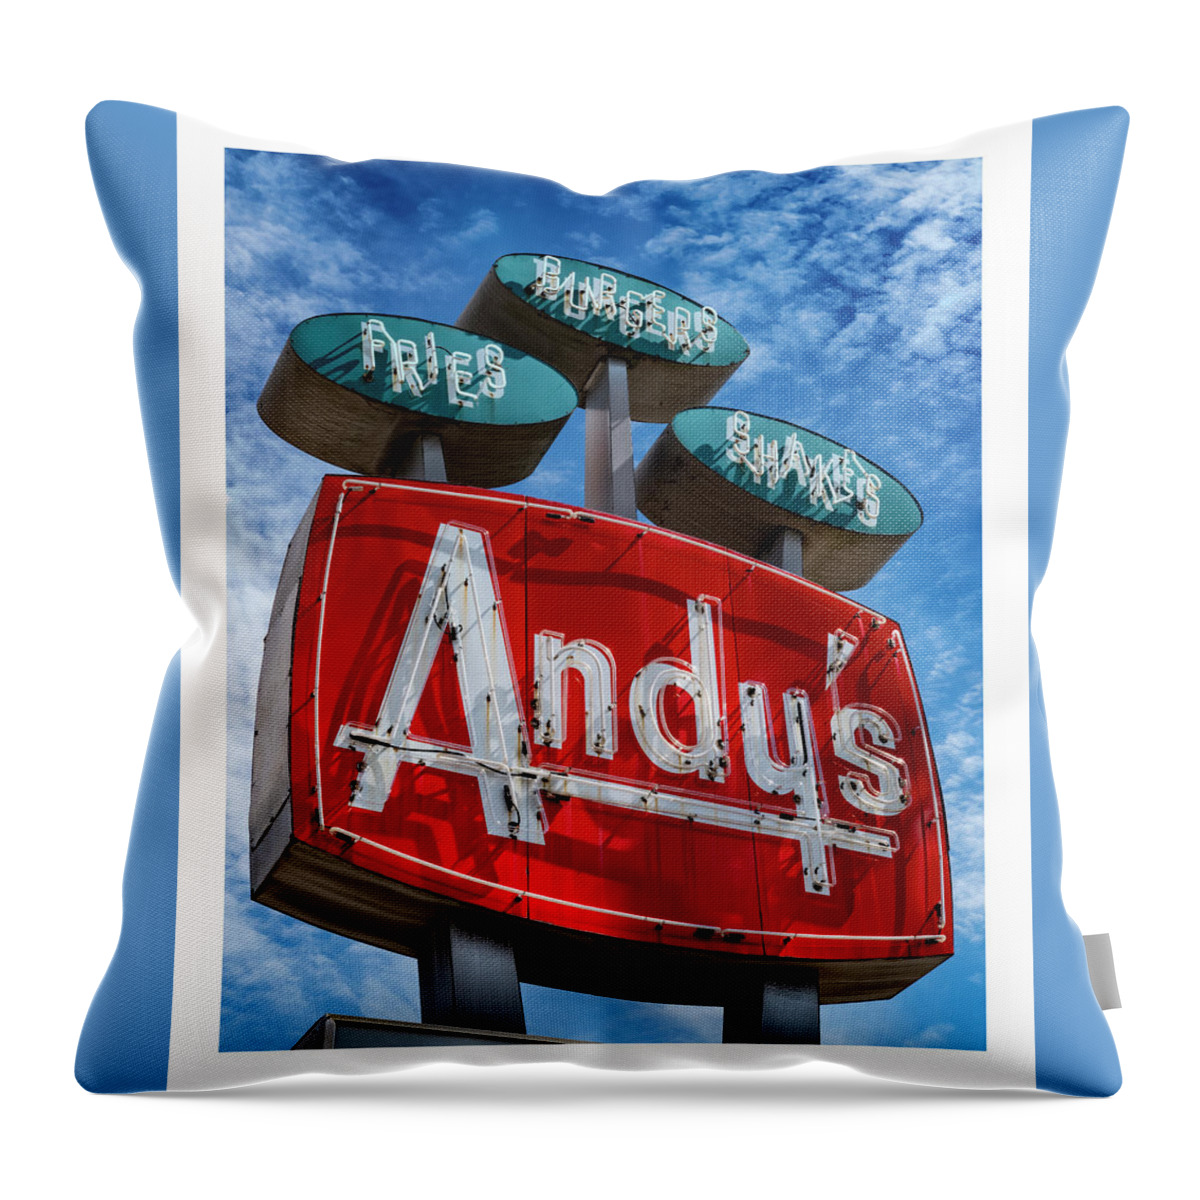 Andy's Throw Pillow featuring the photograph Andy's Igloo Drive In by ARTtography by David Bruce Kawchak